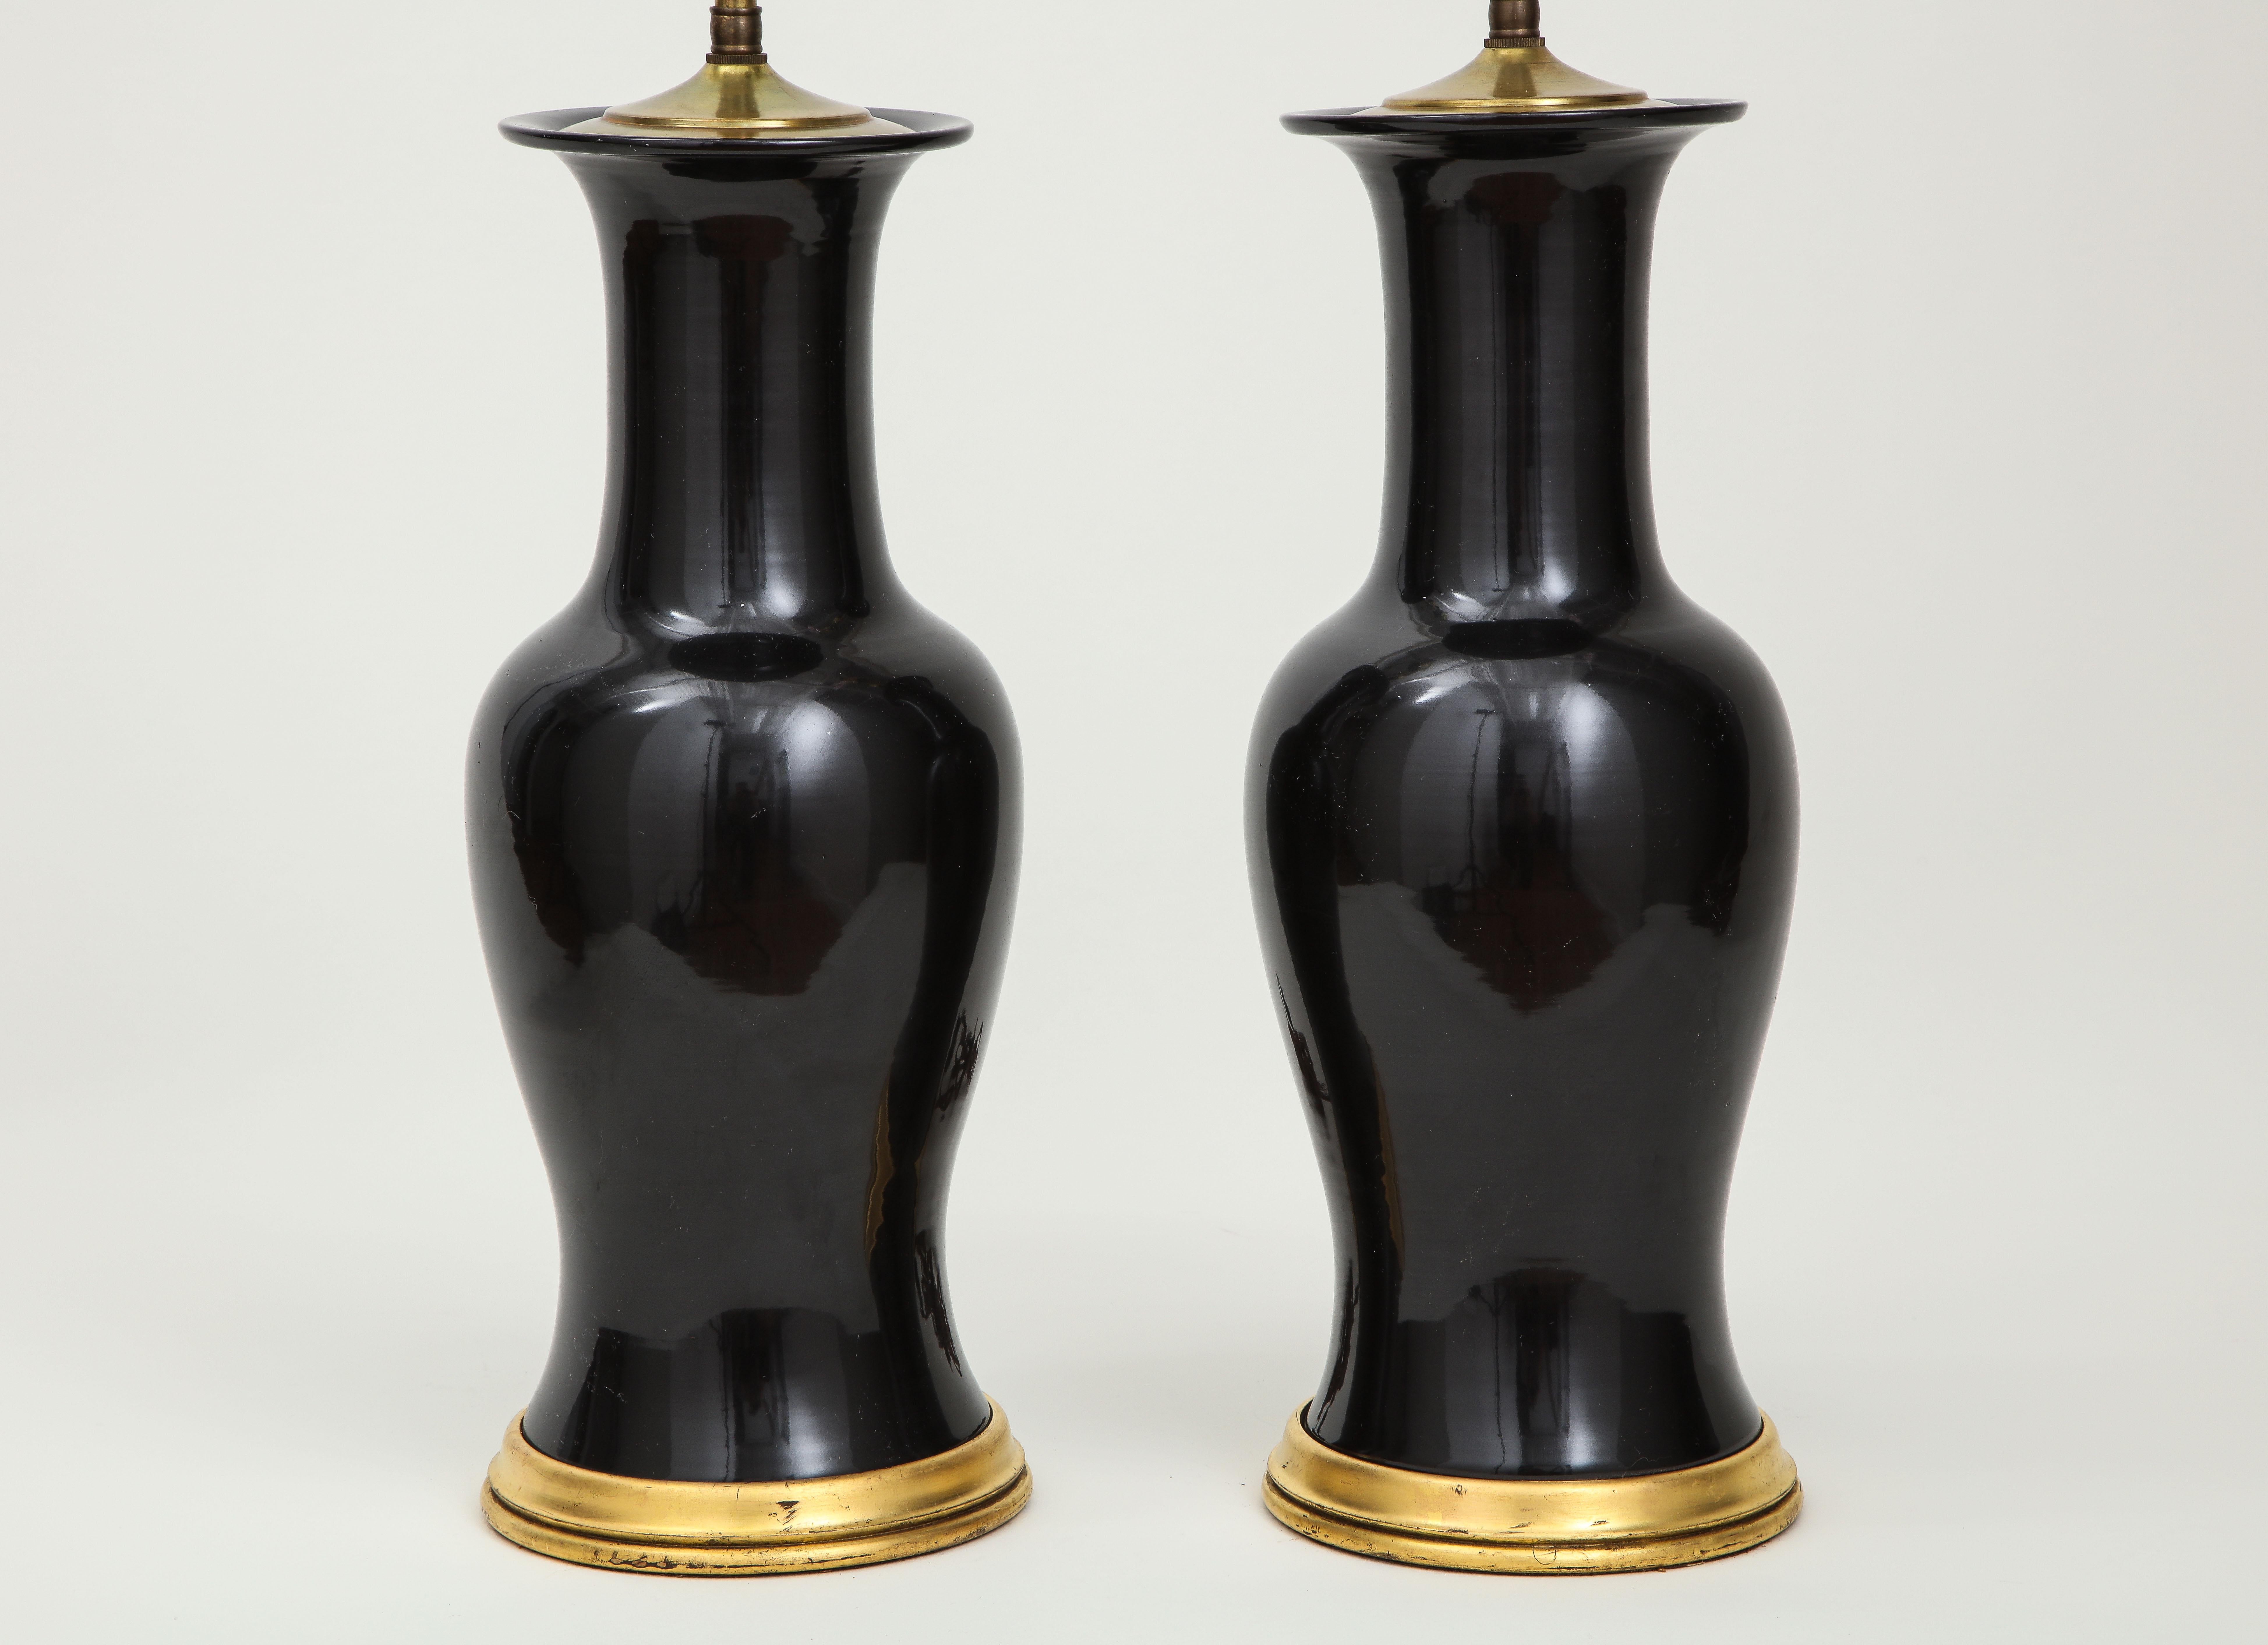 Chinese Export Pair of Black and Gilt Ceramic Vase Lamps